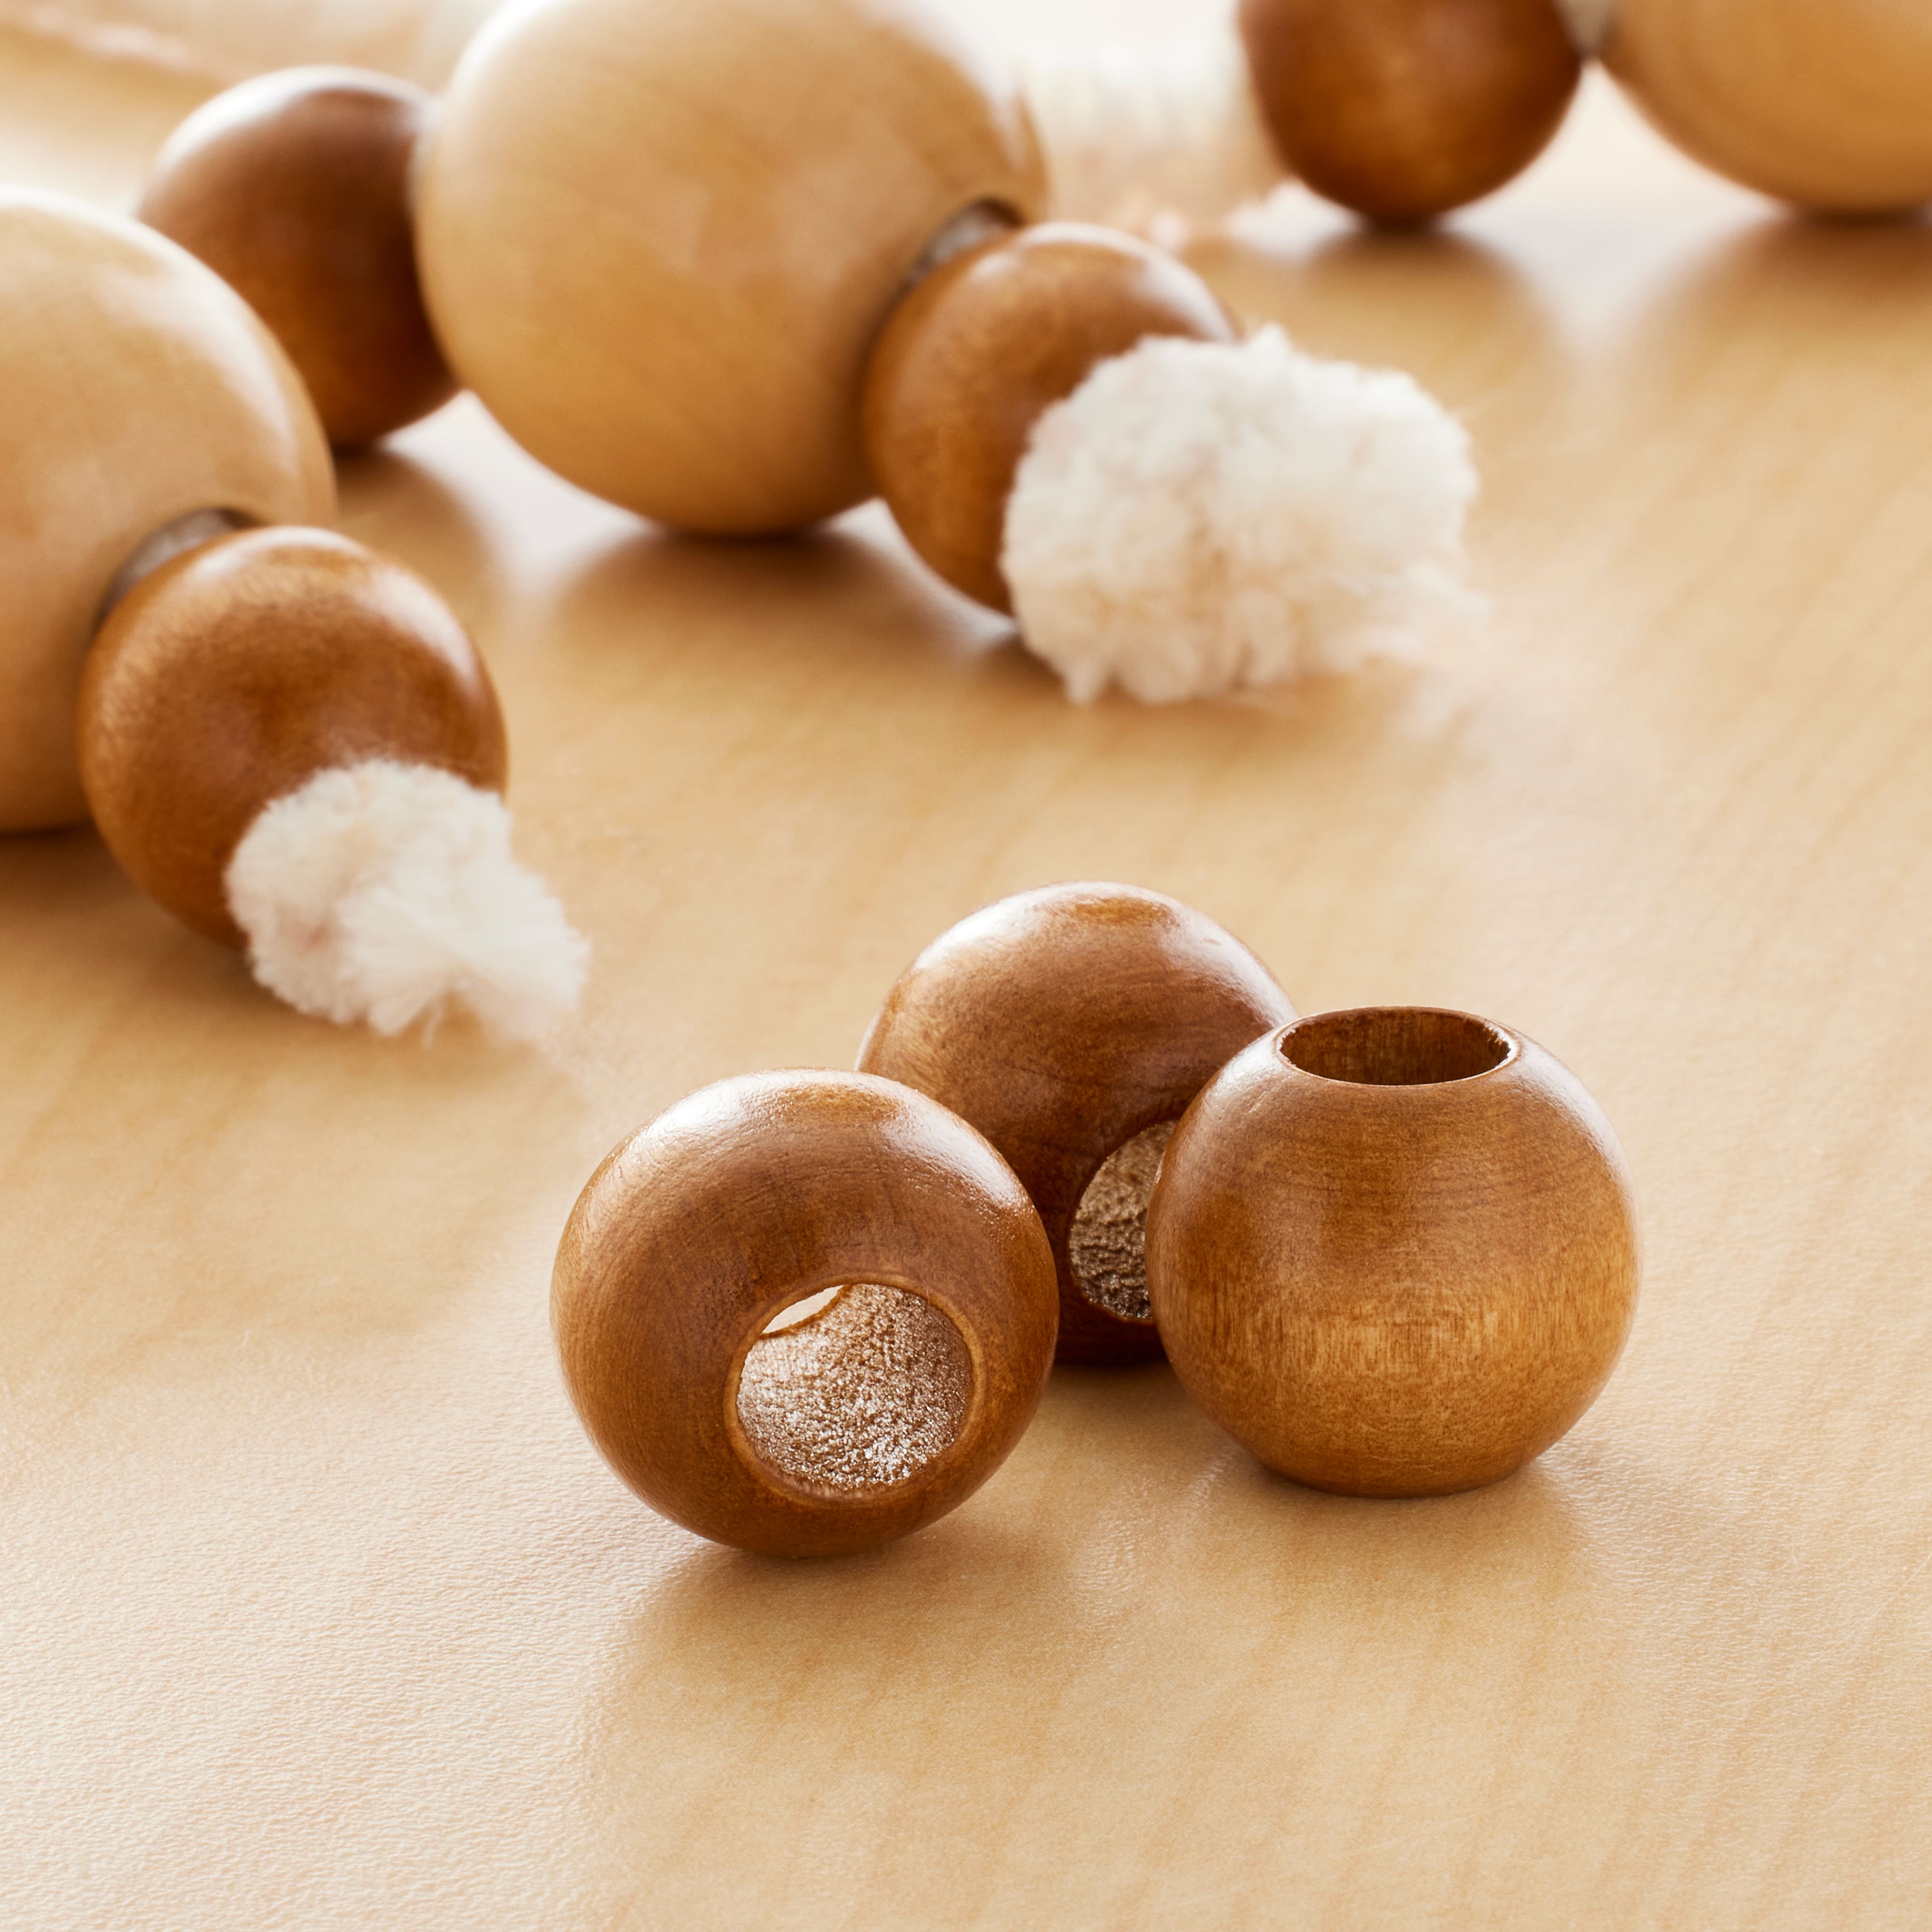 12 Packs: 16 ct. (192 total) Maple Round Wood Beads, 20mm by Loops &#x26; Threads&#xAE;